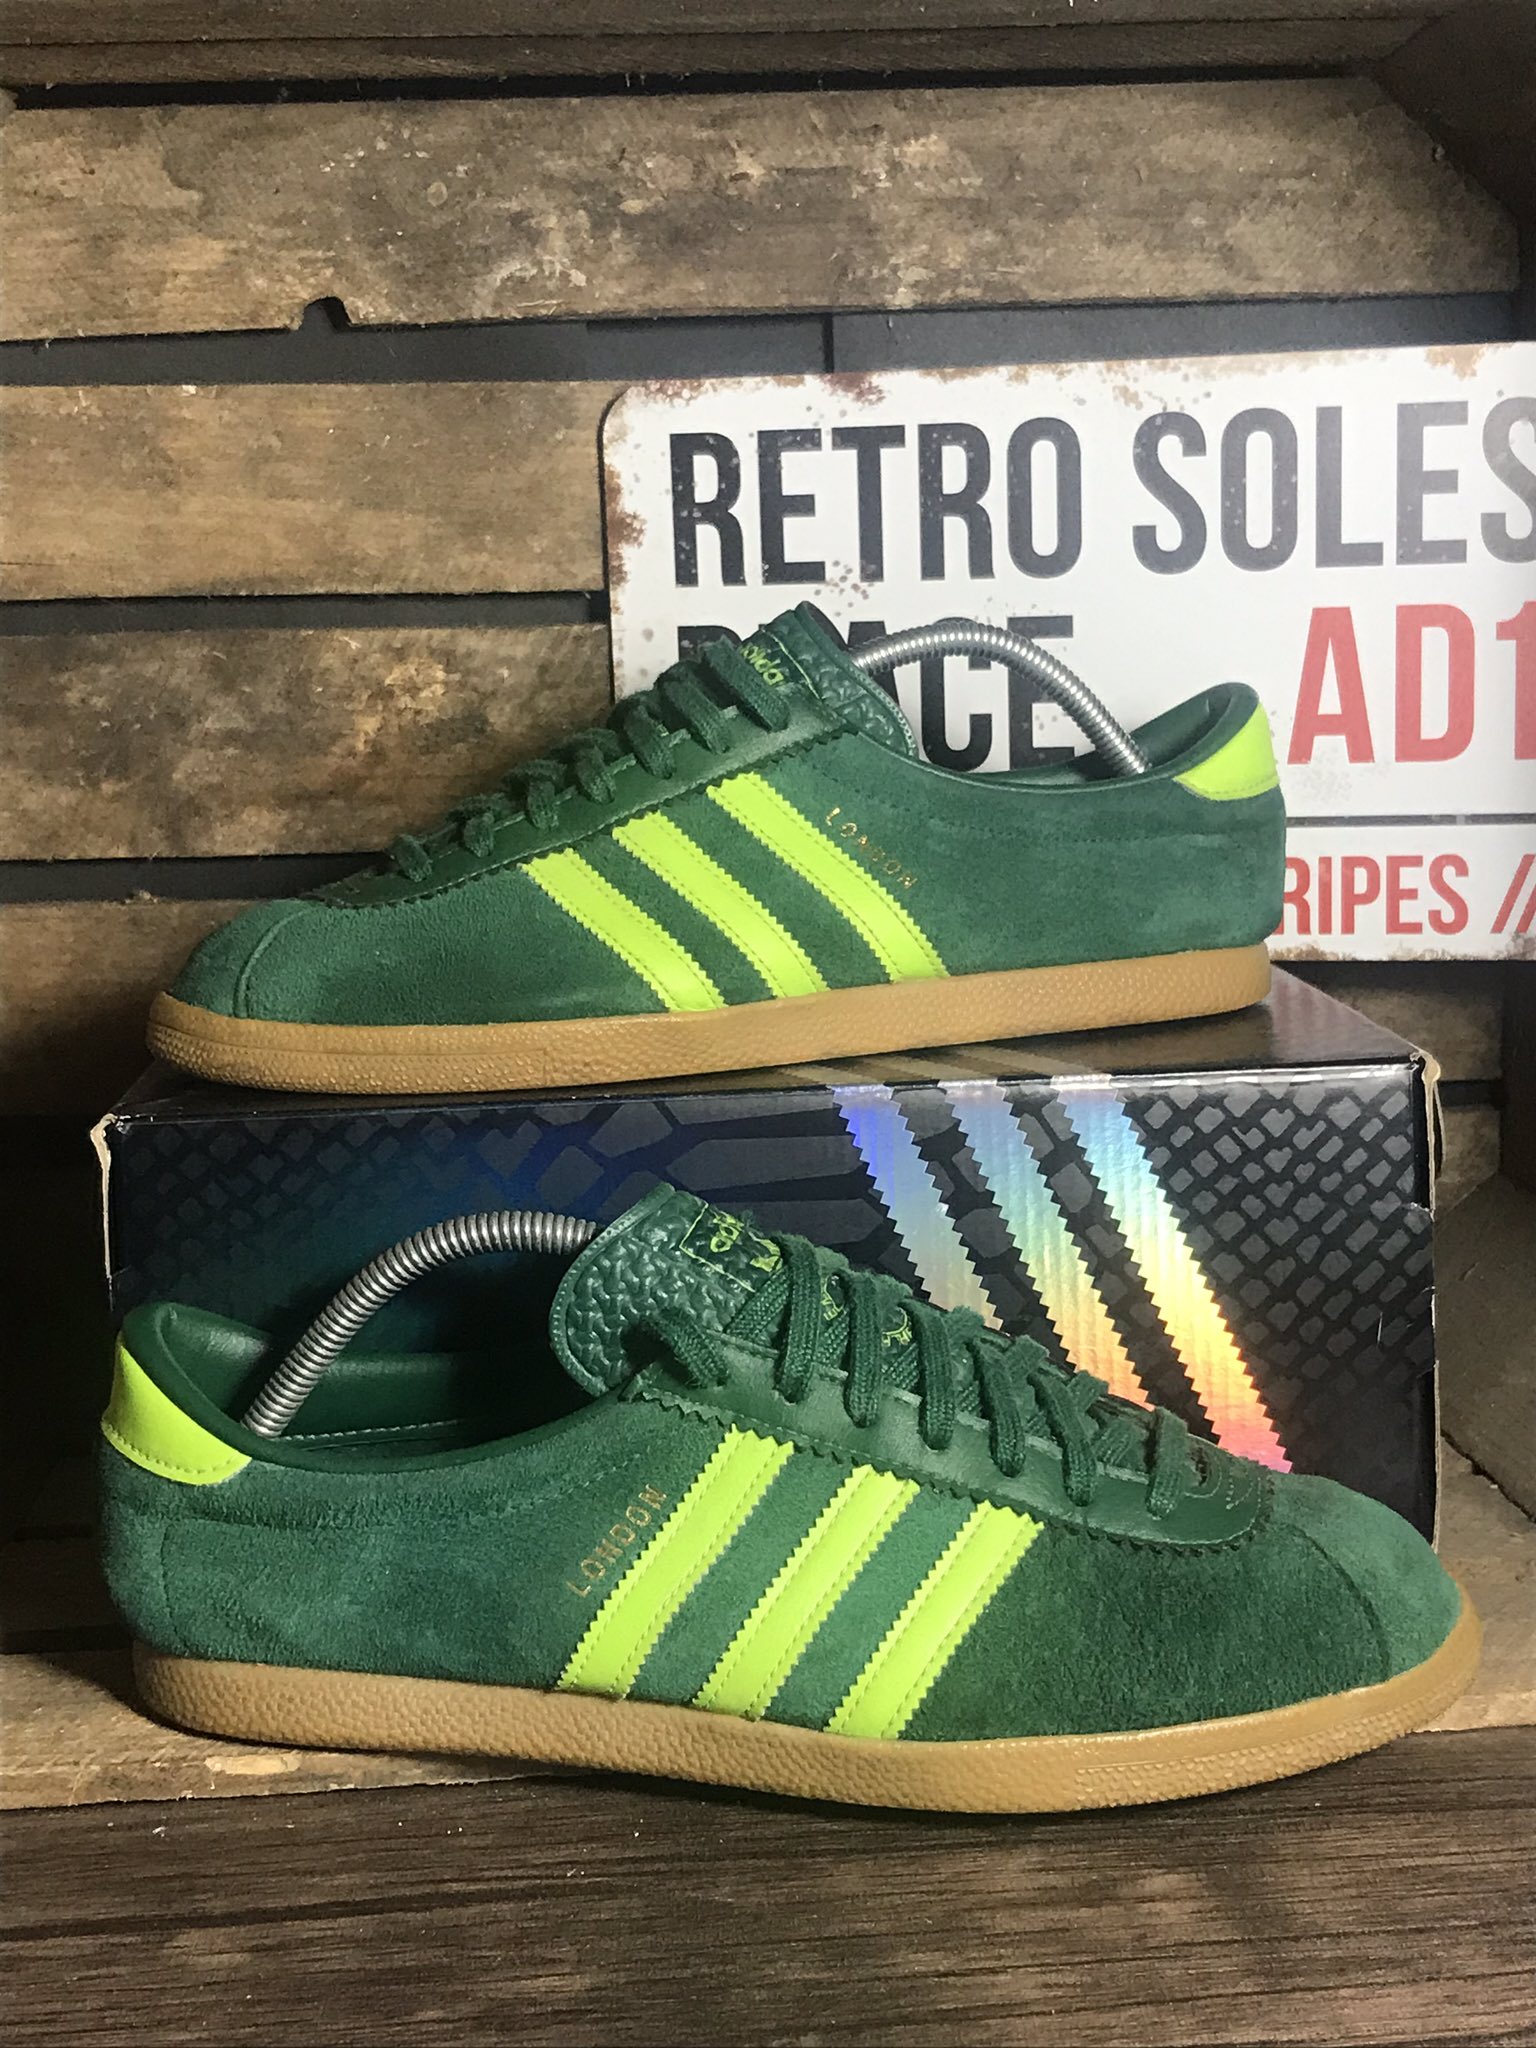 Mal regimiento Nido Retro Soles on Twitter: "For Sale:- #Adidas #London #Slime Date of  Release:- 10/10 UK 9 Condition:- Good Pre Worn With OG Box:- No £150  DELIVERED More Photos Available RT Appreciated DM me